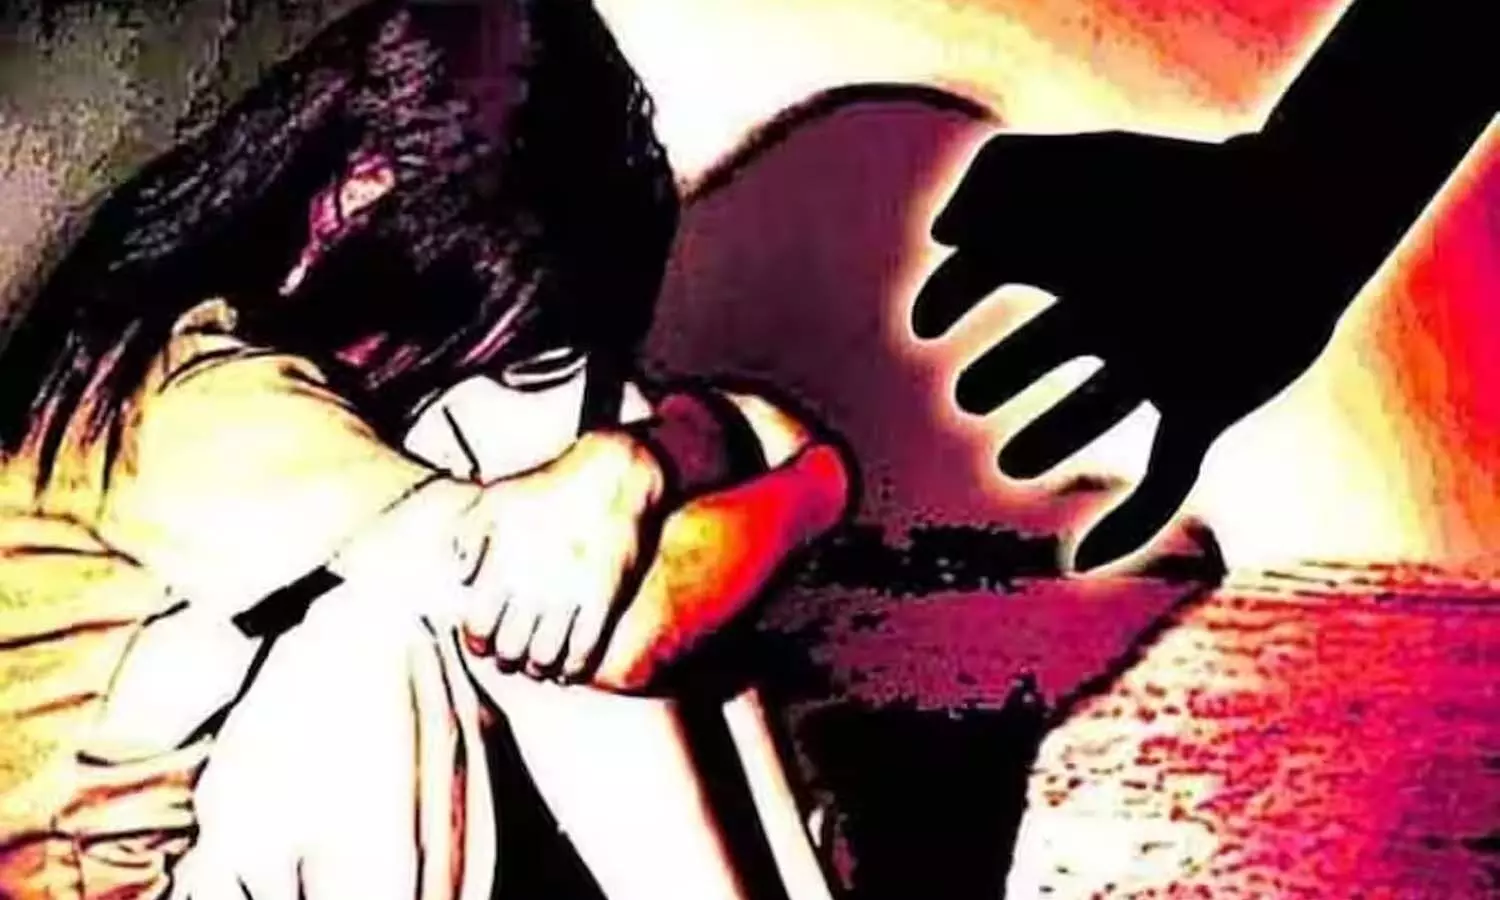 Father raped his daughter in Sonbhadra, FIR lodged